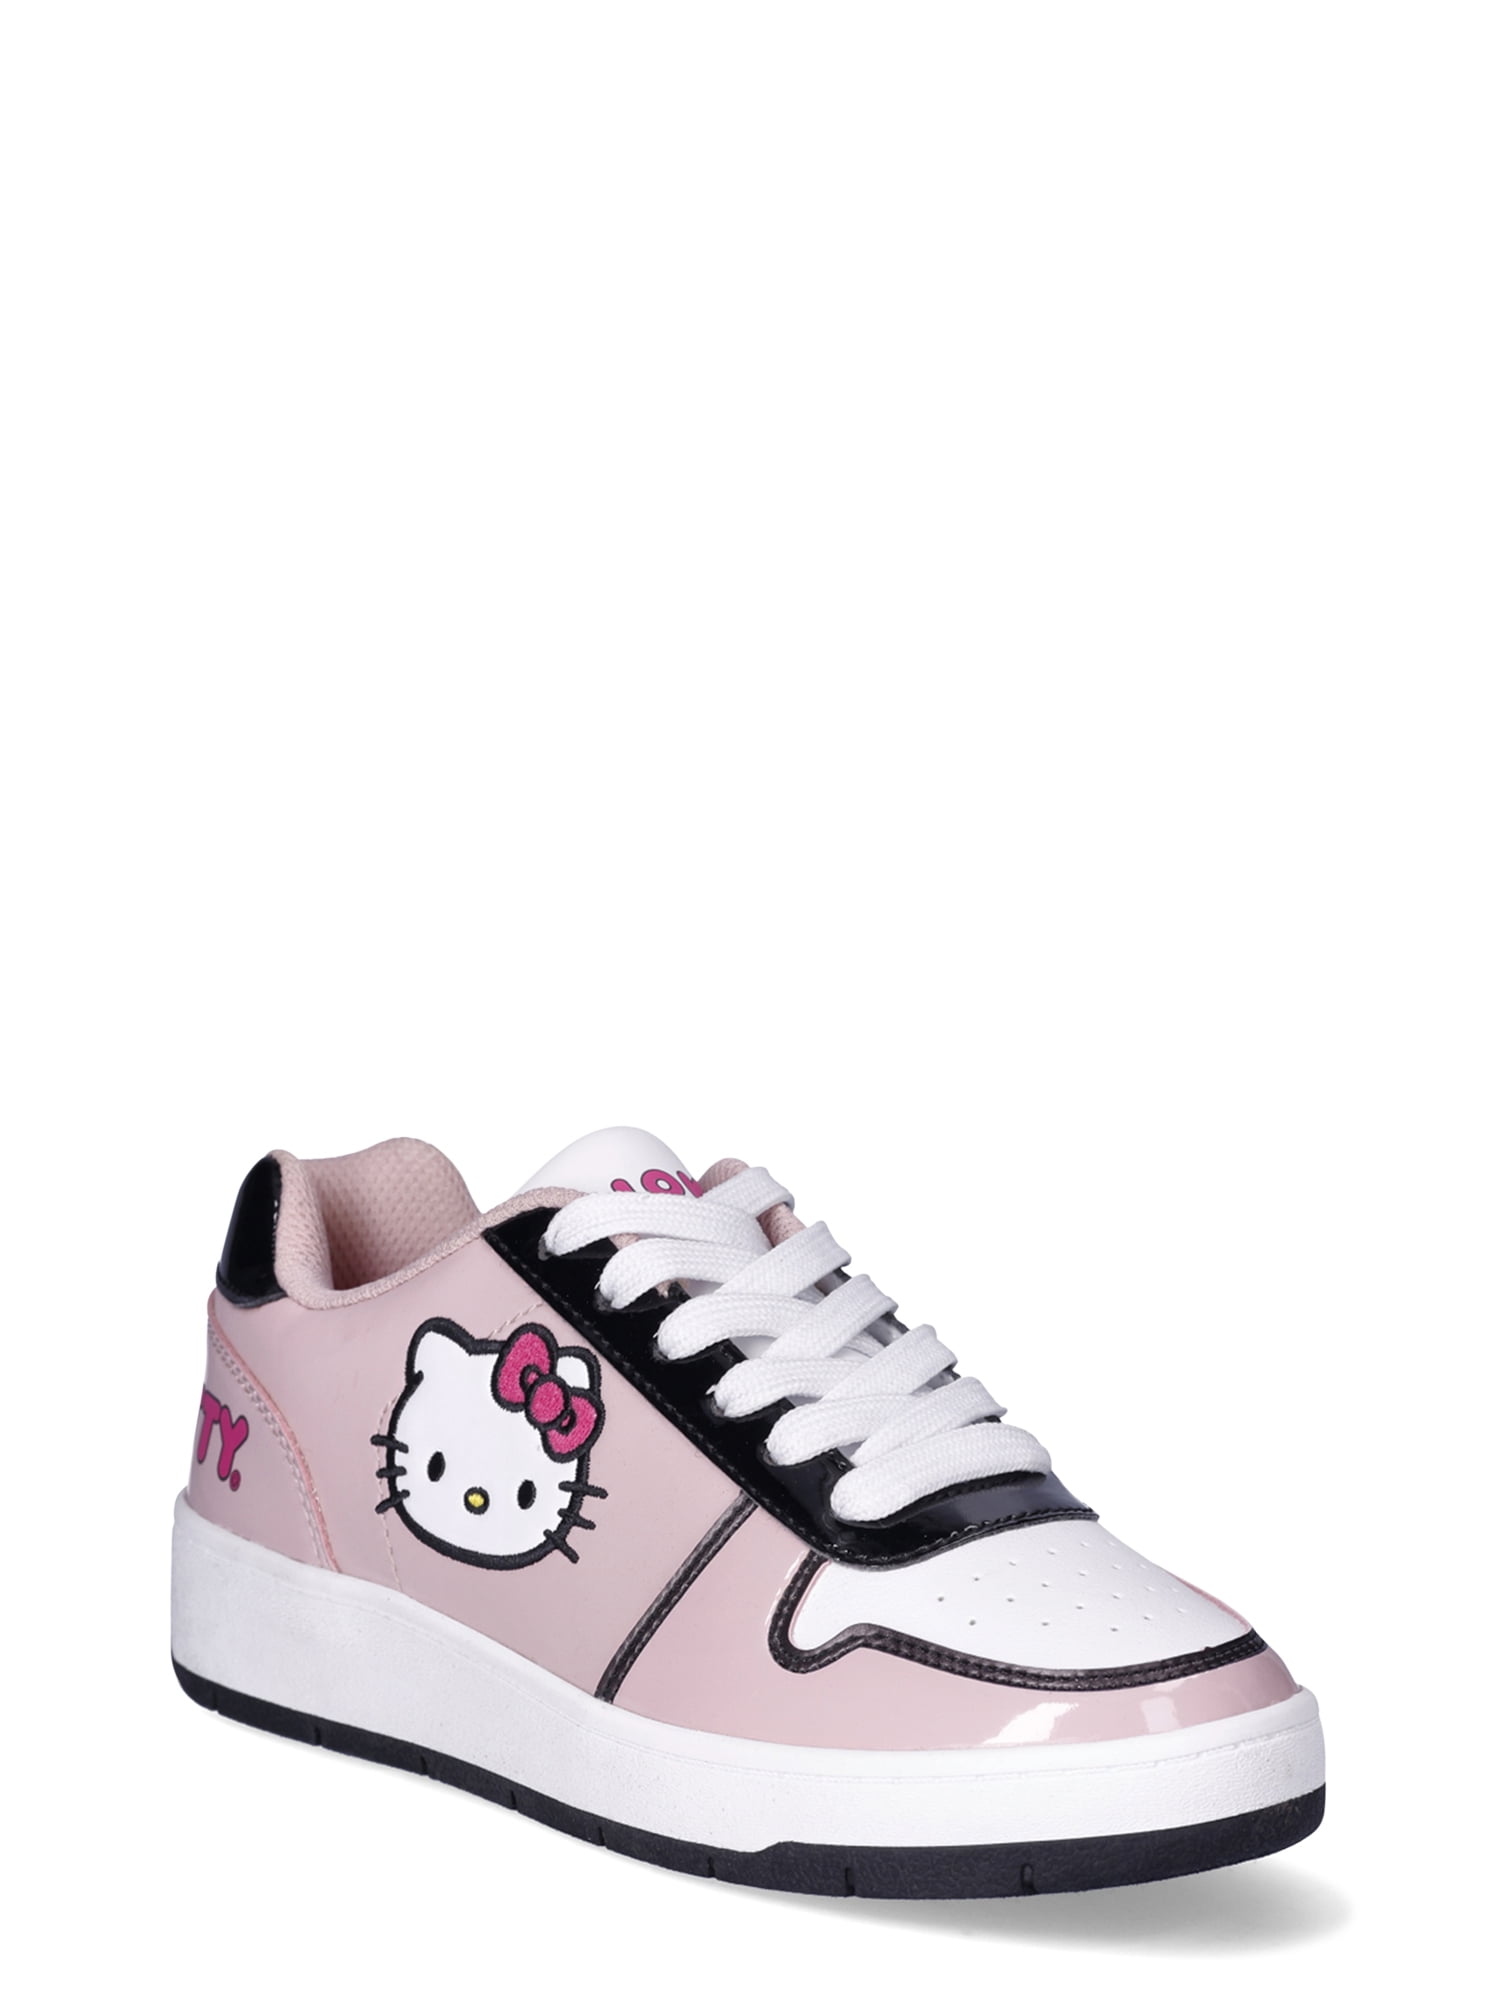 Hello Kitty by Sanrio Women's Pink Casual Court Sneakers, Sizes 6-11,  Regular Width 